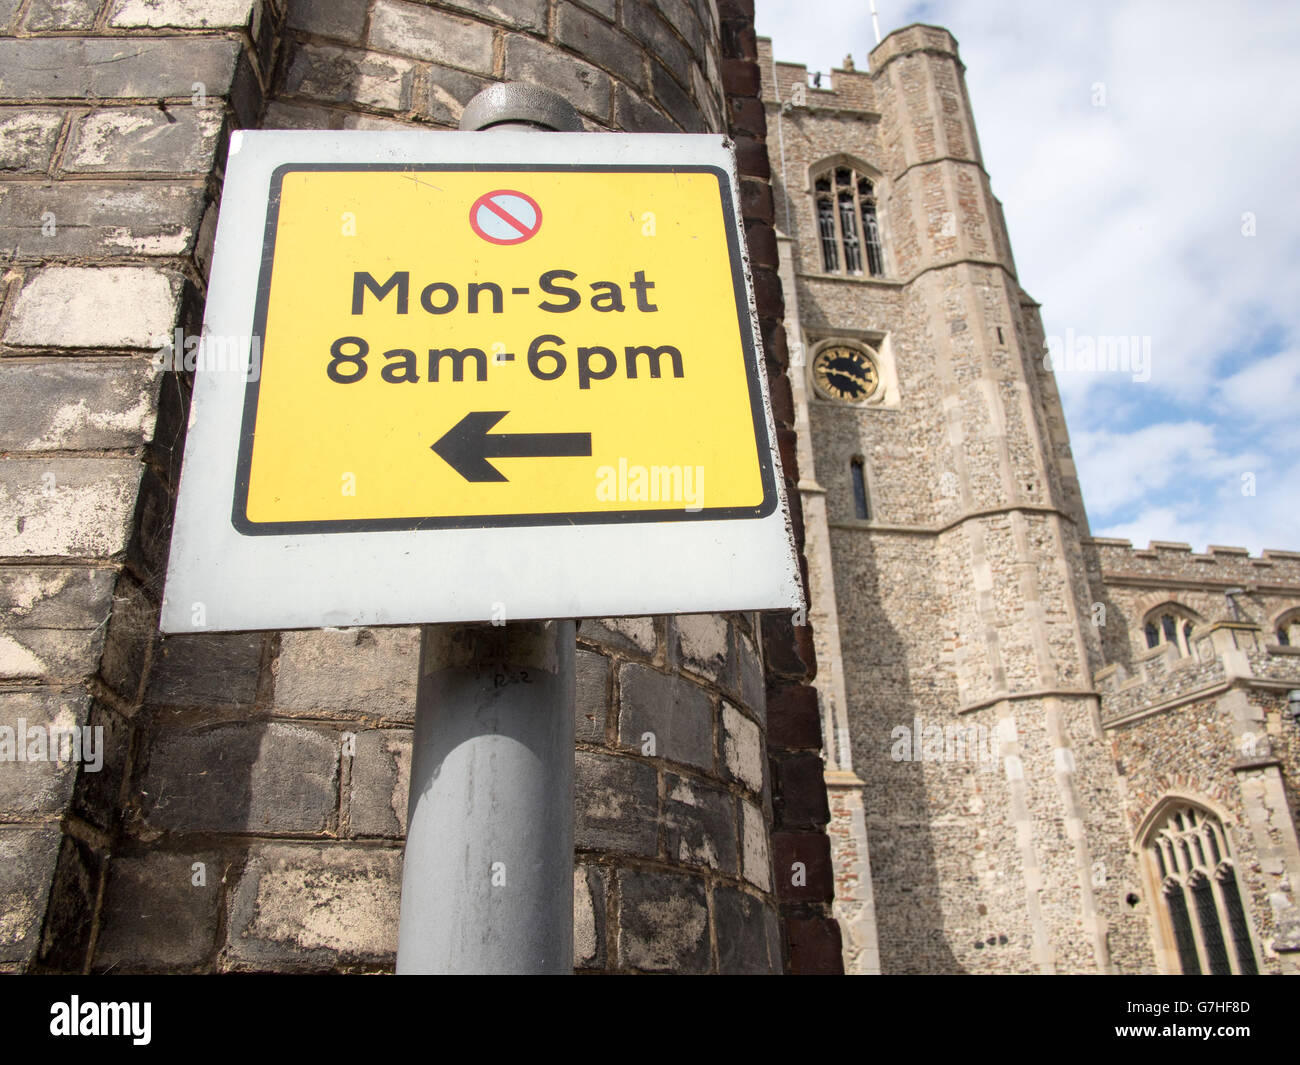 A UK parking sign indicating parking restrictions, Monday to Saturday. Stock Photo